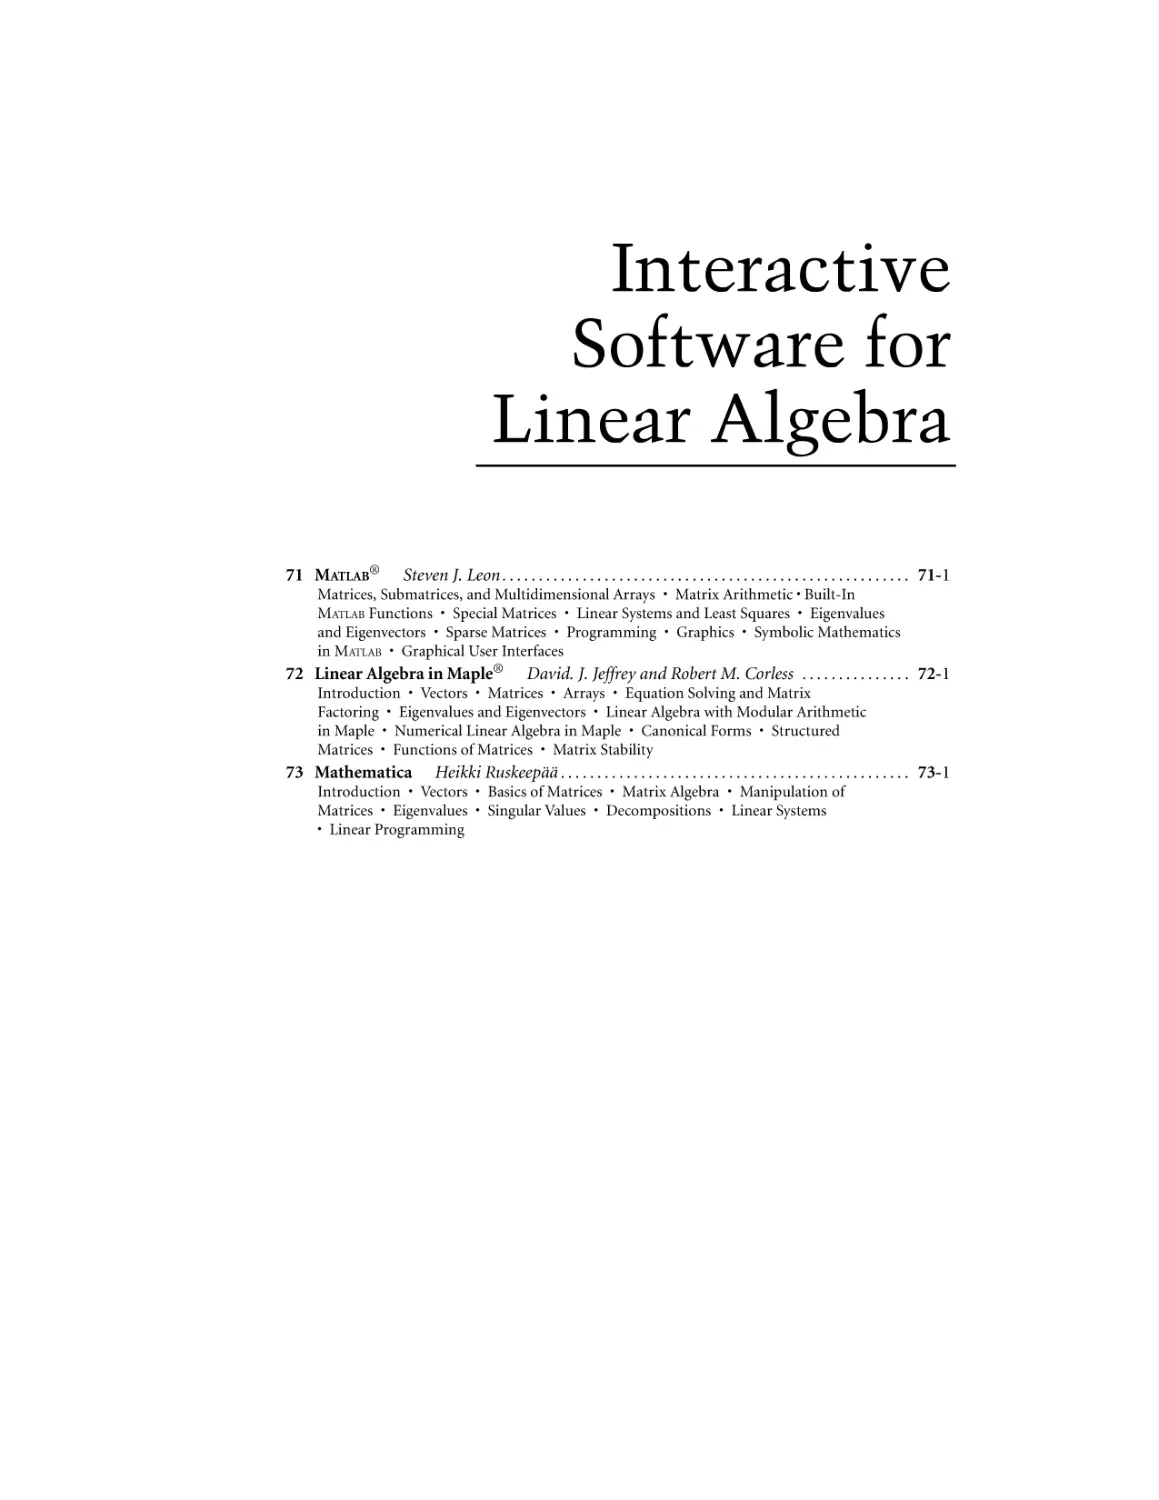 Interactive Software for Linear Algebra